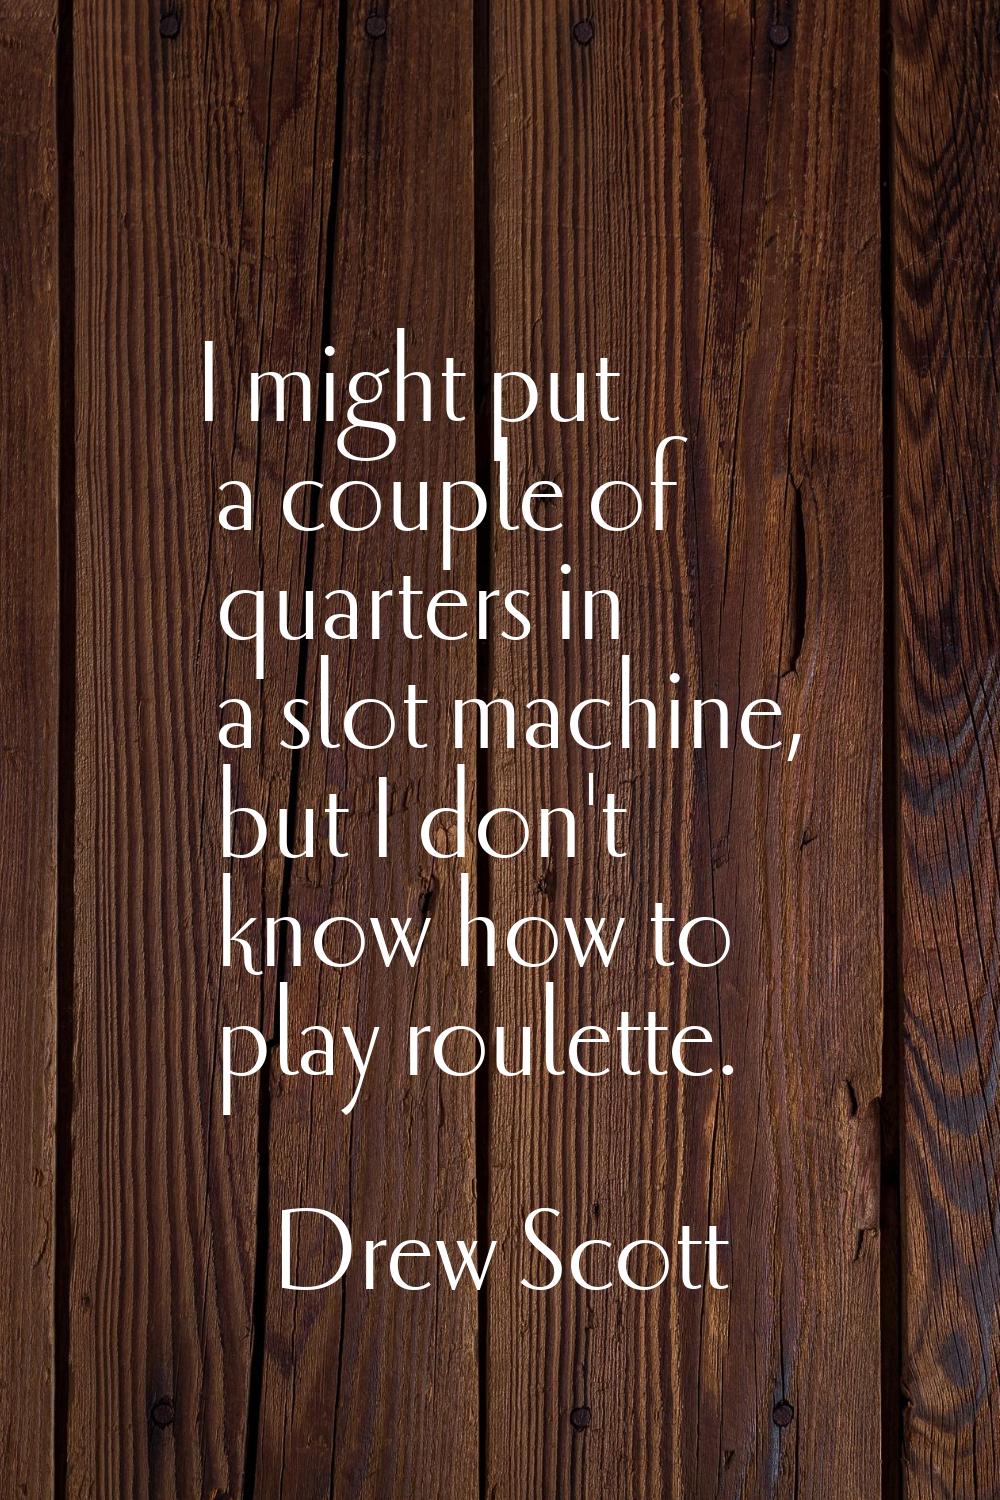 I might put a couple of quarters in a slot machine, but I don't know how to play roulette.